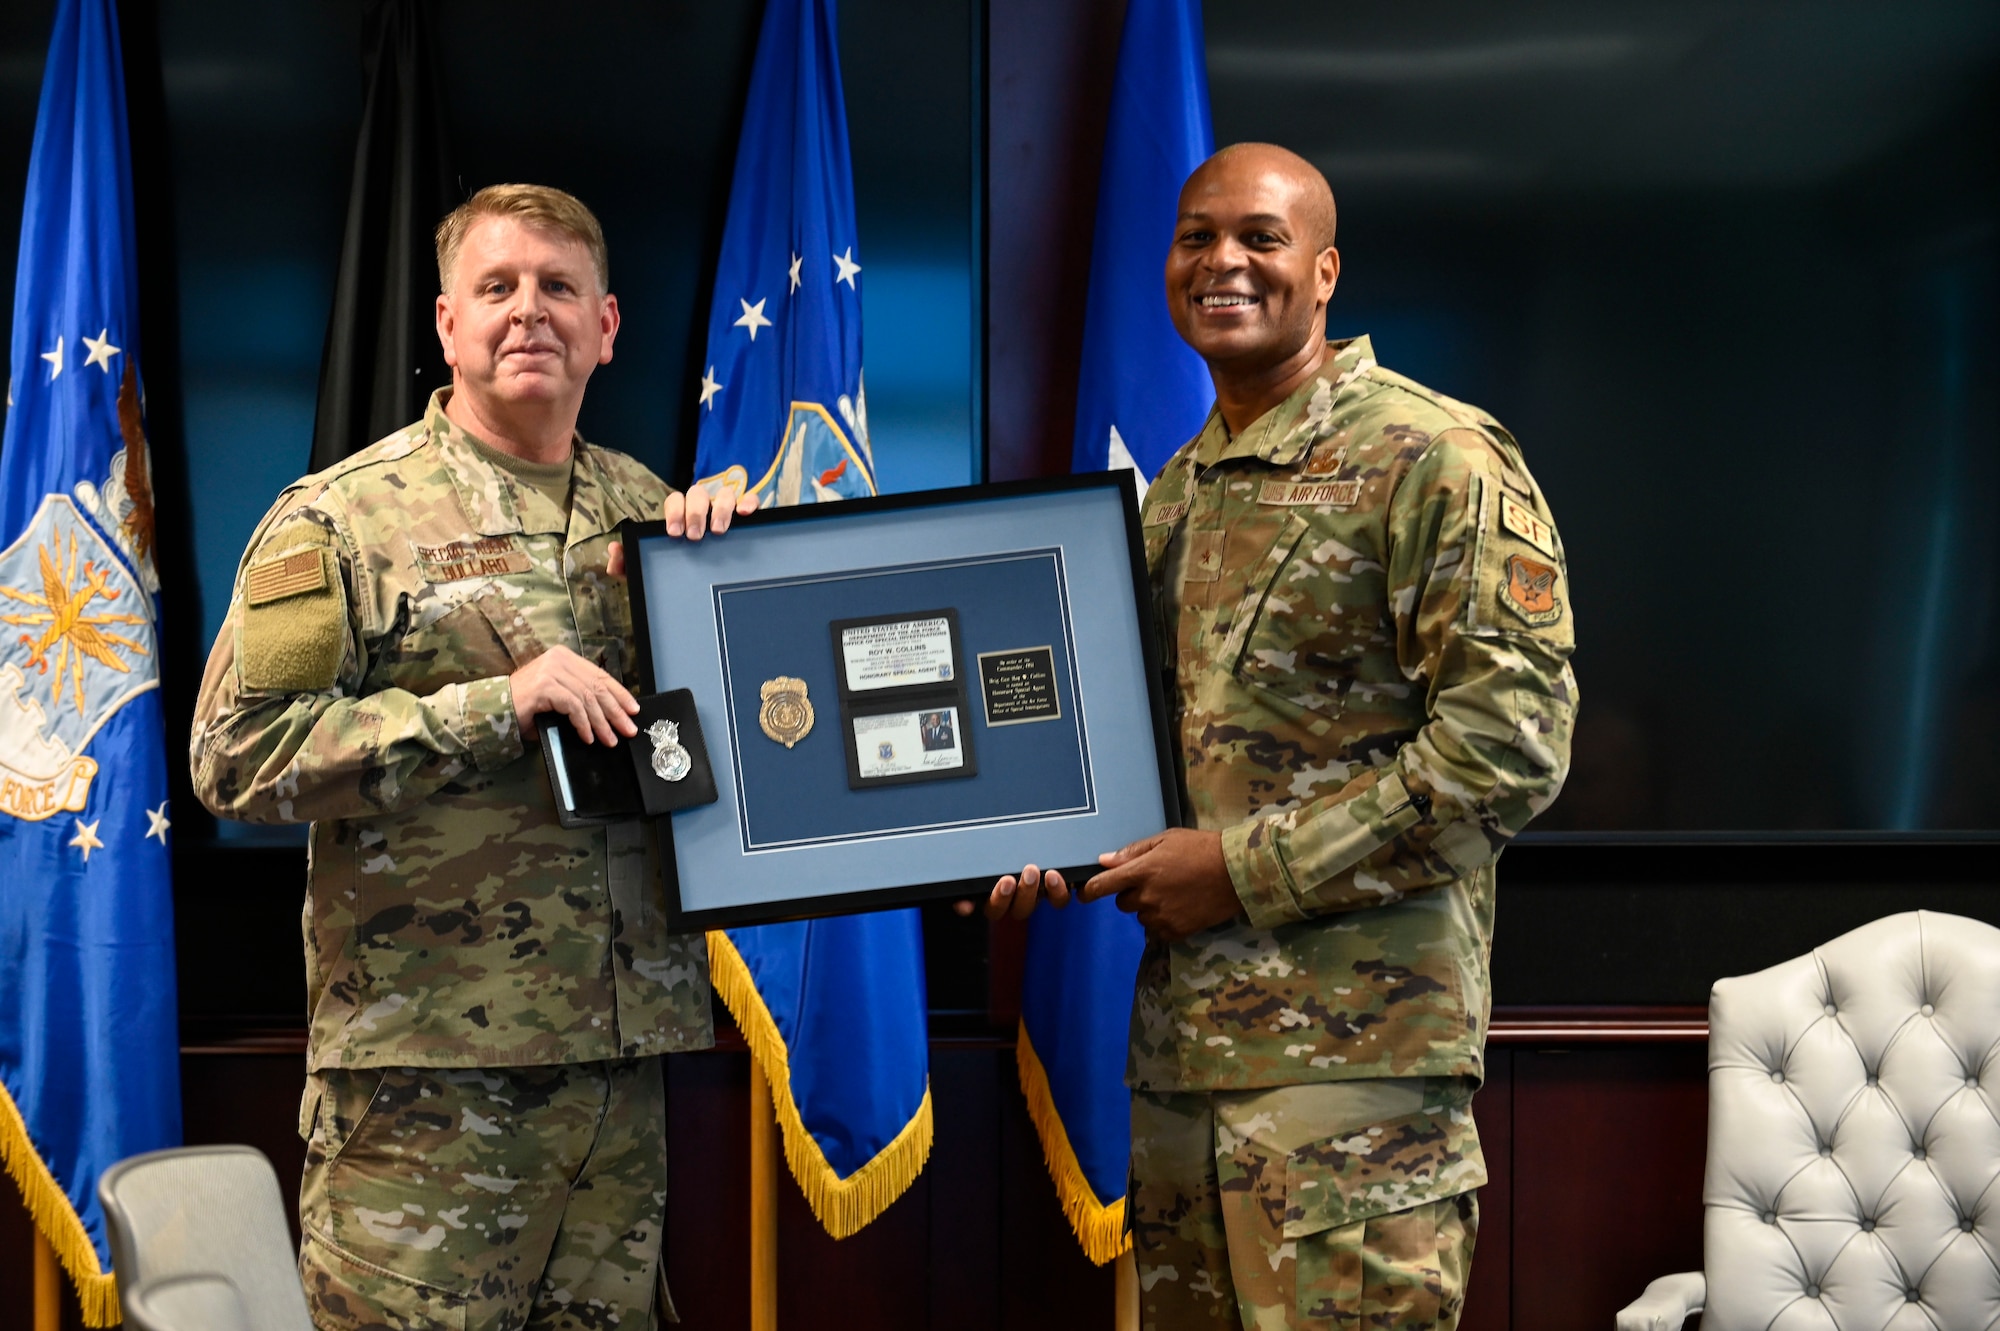 The DAF's top two law enforcement leaders, Office of Special Investigations Commander, Brig. Gen Terry L. Bullard, left, and Air Force Director of Security Forces, Brig. Gen. Roy W. Collins, exchange credentials during an honorary ceremony at OSI headquarters, in Quantico, Va., Oct. 24, 2022. In the 75 year history of OSI, less than 70 honorary credentials have been awarded. (U.S. Air Force photo by Staff Sgt. Joshua King)